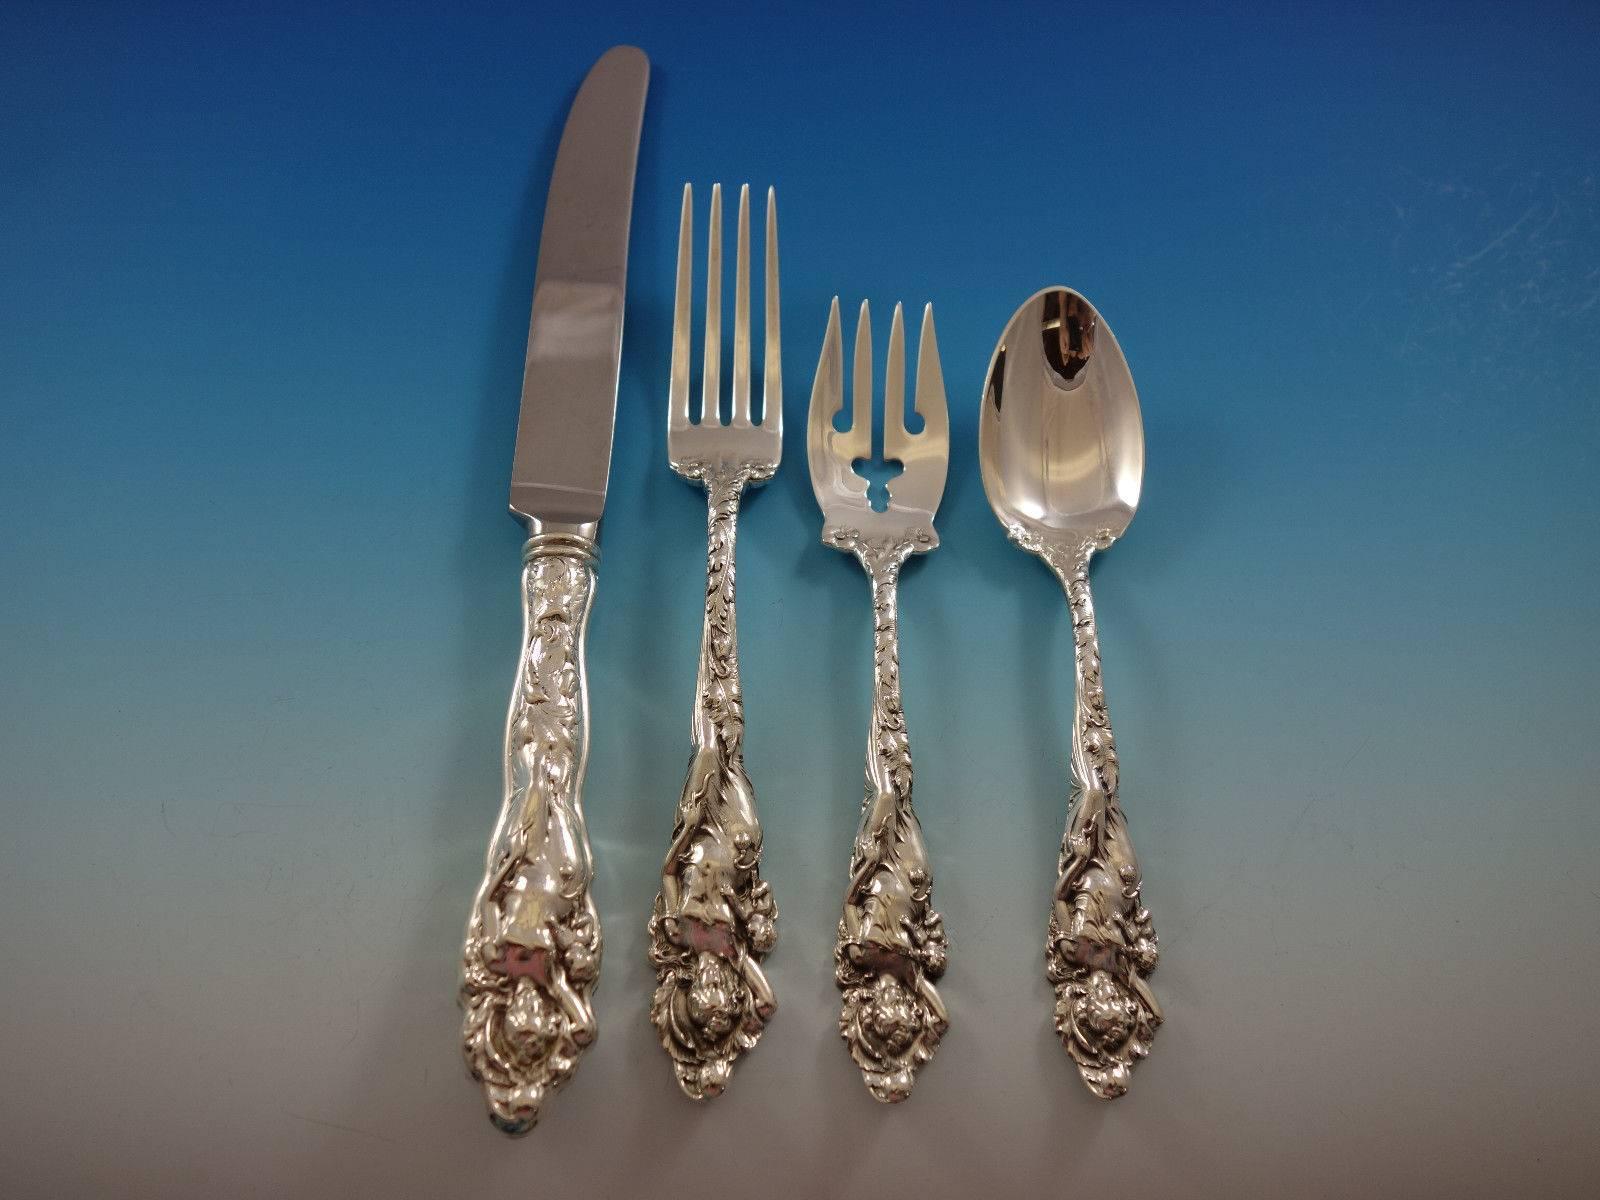 Love Disarmed by Reed and Barton sterling silver flatware set, 67 pieces. This set includes: 12 knives, 9 1/4", 12 forks, 7 1/8", 12 salad forks, 6 1/8",
12 teaspoons, 6", 12 flat handle butter spreaders, 6", two serving